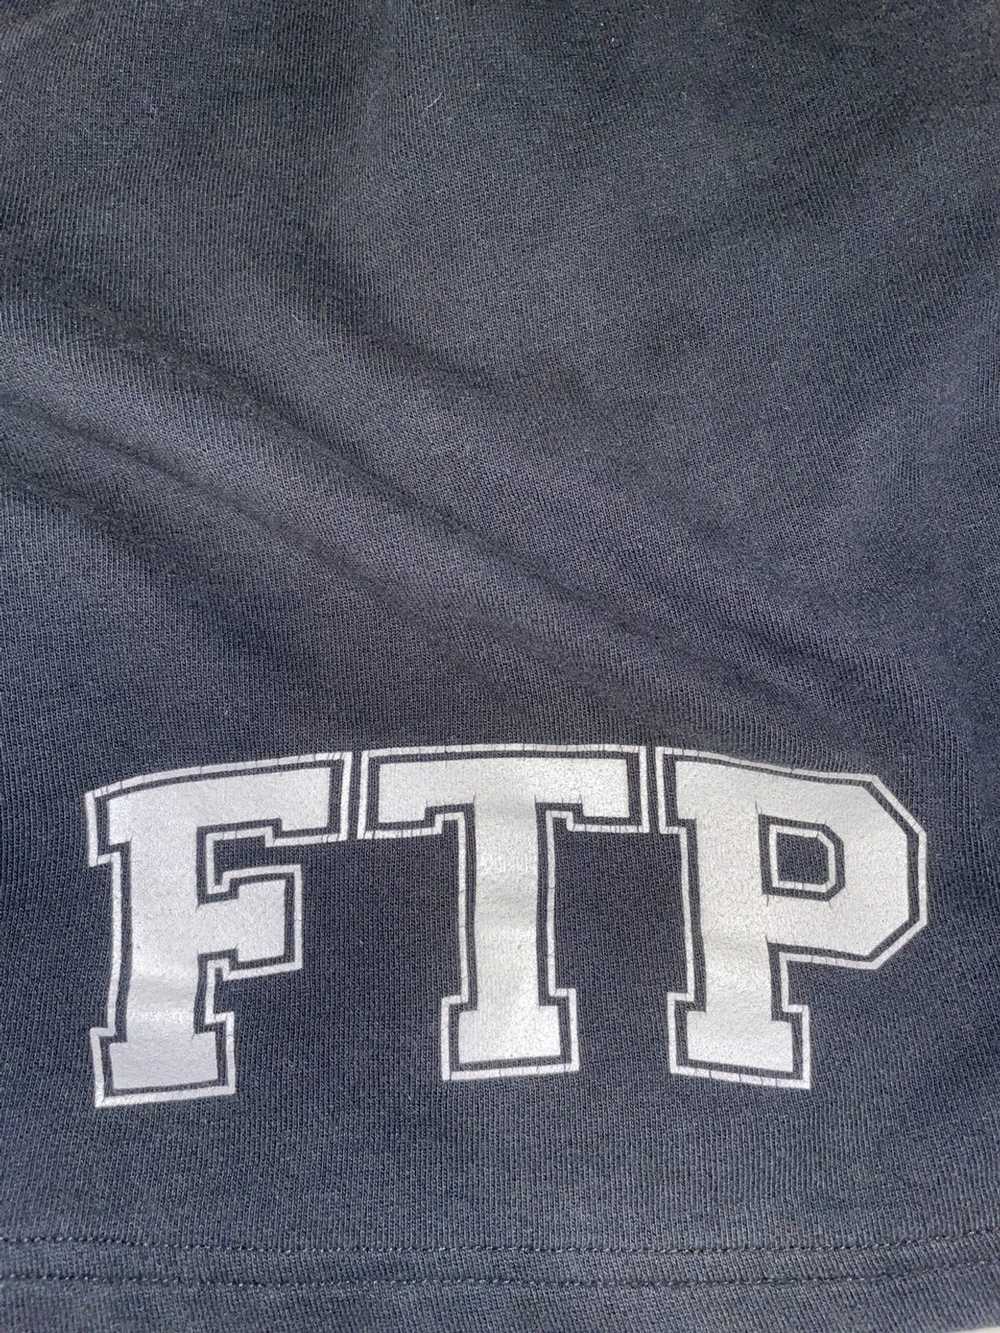 Fuck The Population FTP Athletic Shorts - image 5